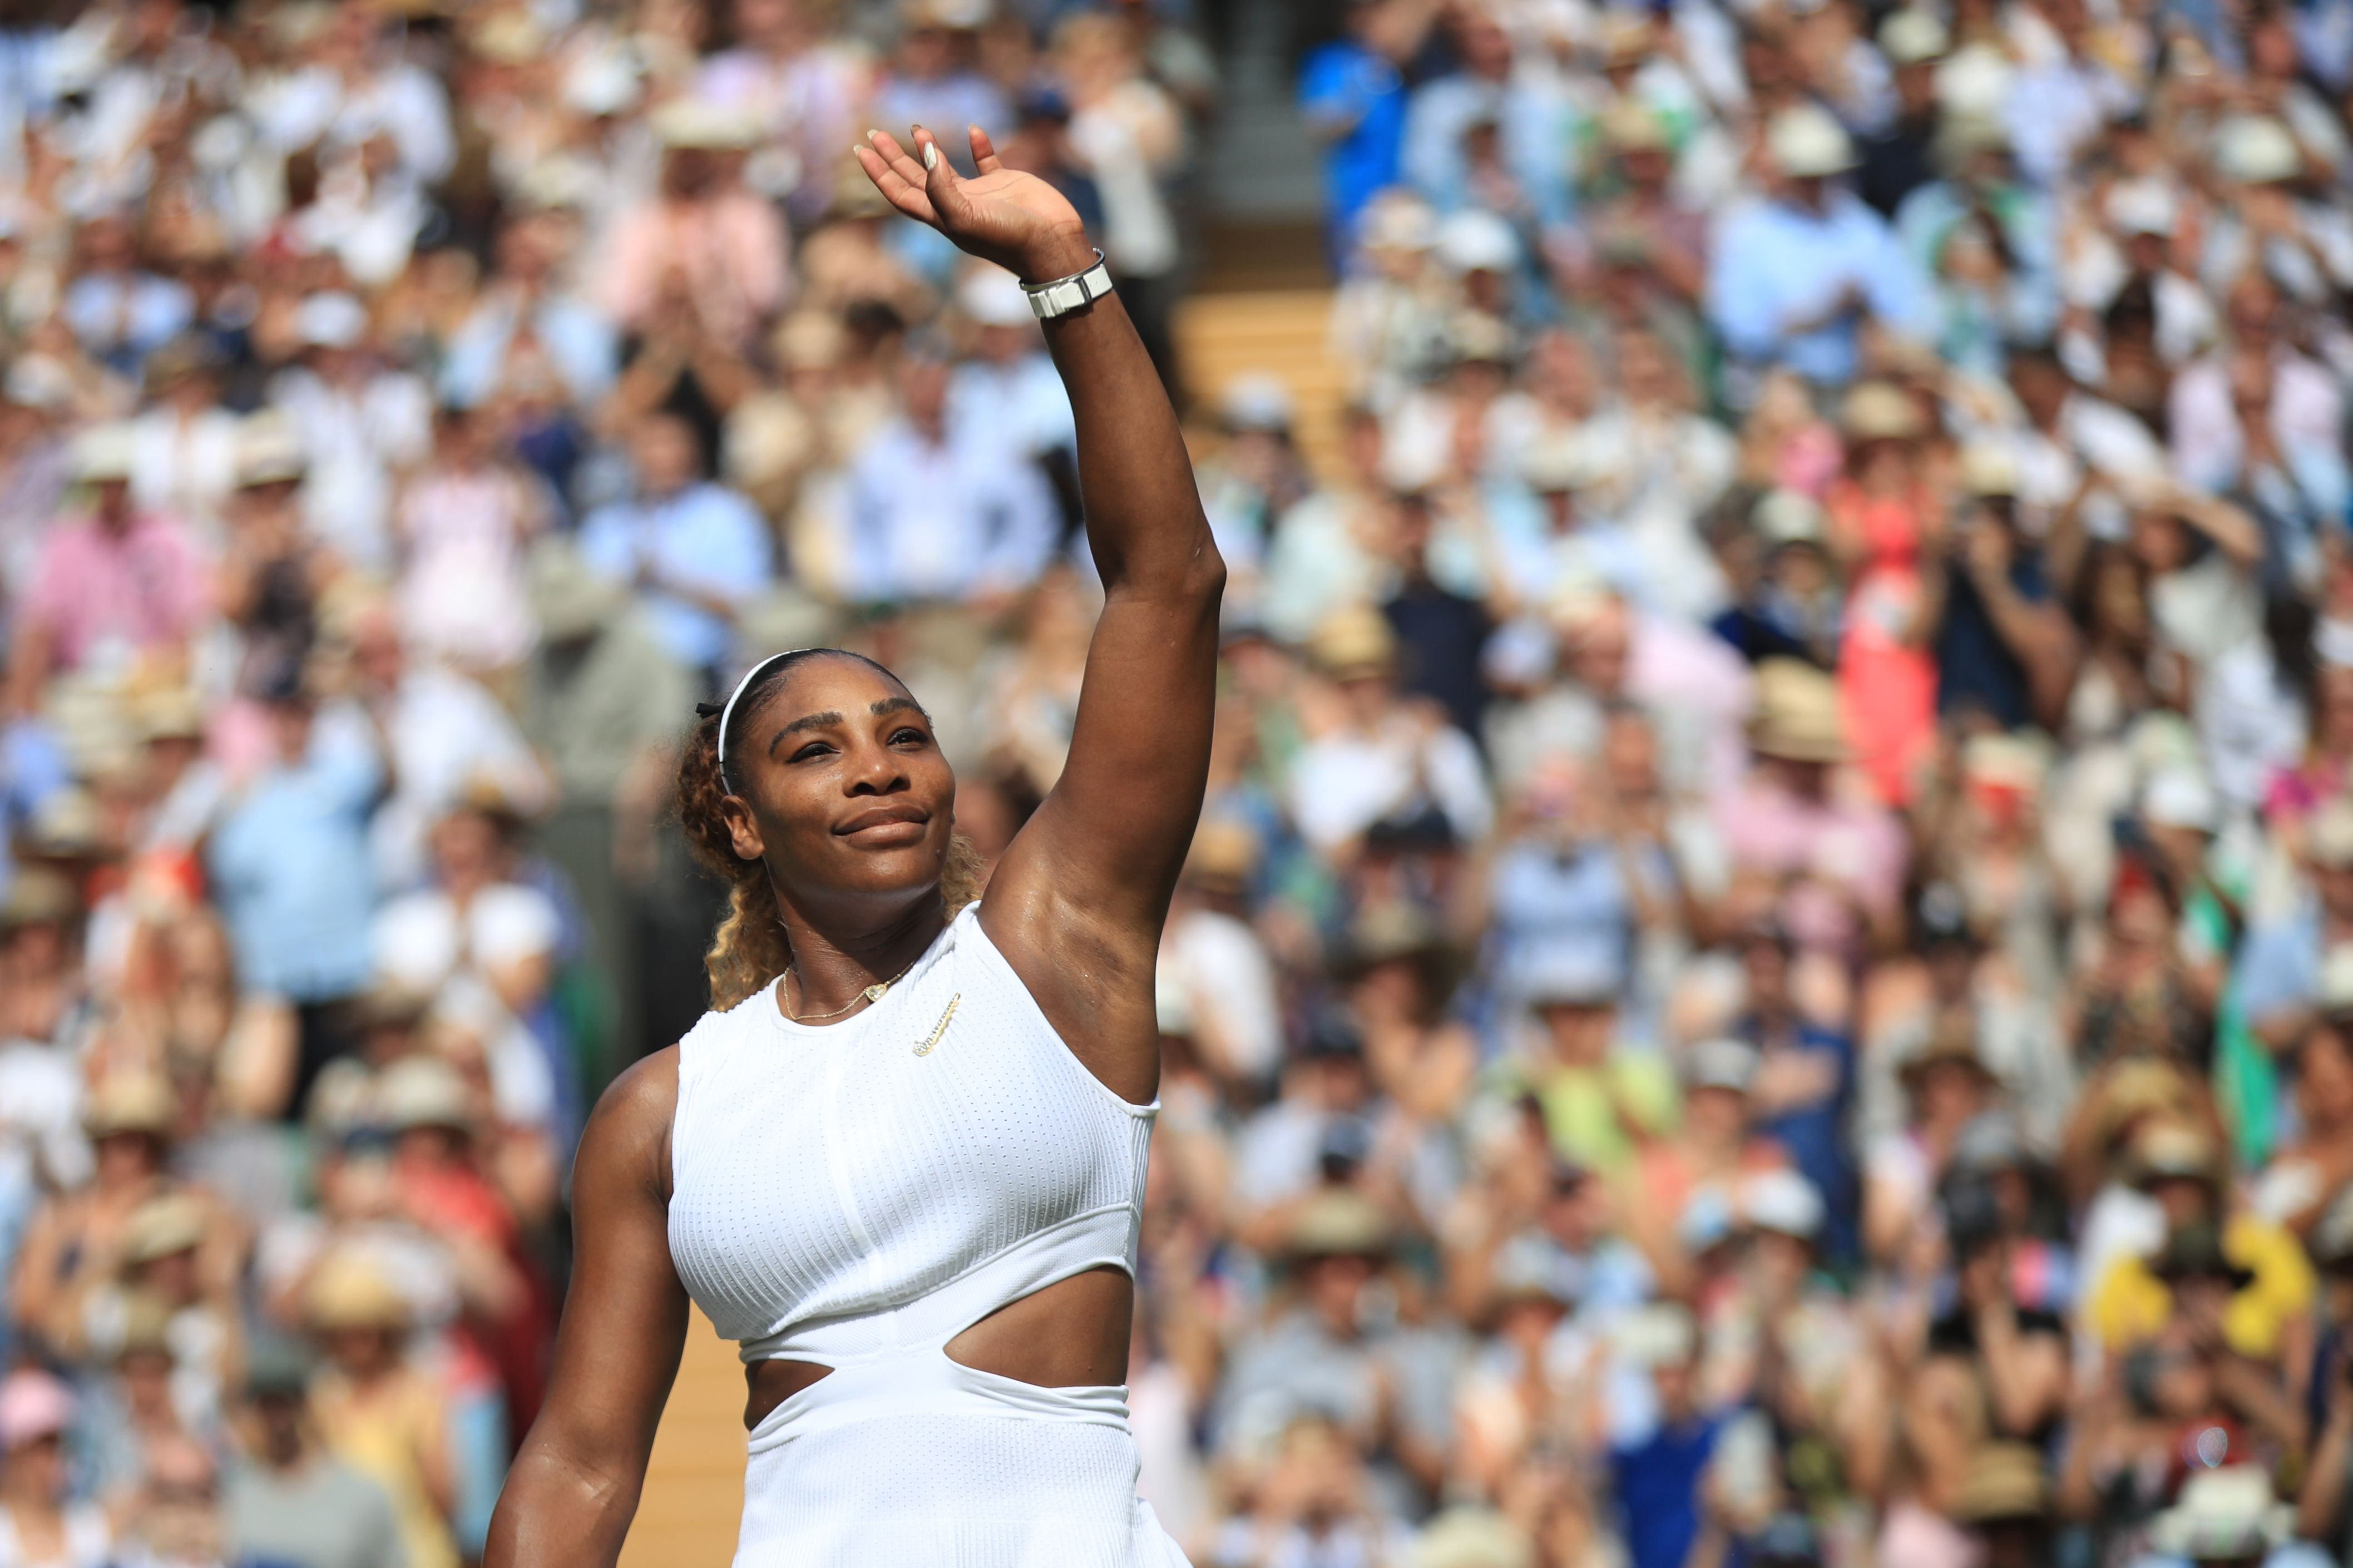 US player Serena Williams celebrates after beating Czech Republic's Barbora Strycova during their women's singles semi-final match on day ten of the 2019 Wimbledon Championships at The All England Lawn Tennis Club in Wimbledon, southwest London, on July 11, 2019. (Photo by Adam DAVY / POOL / AFP) / RESTRICTED TO EDITORIAL USE (Photo credit should read ADAM DAVY/AFP via Getty Images)